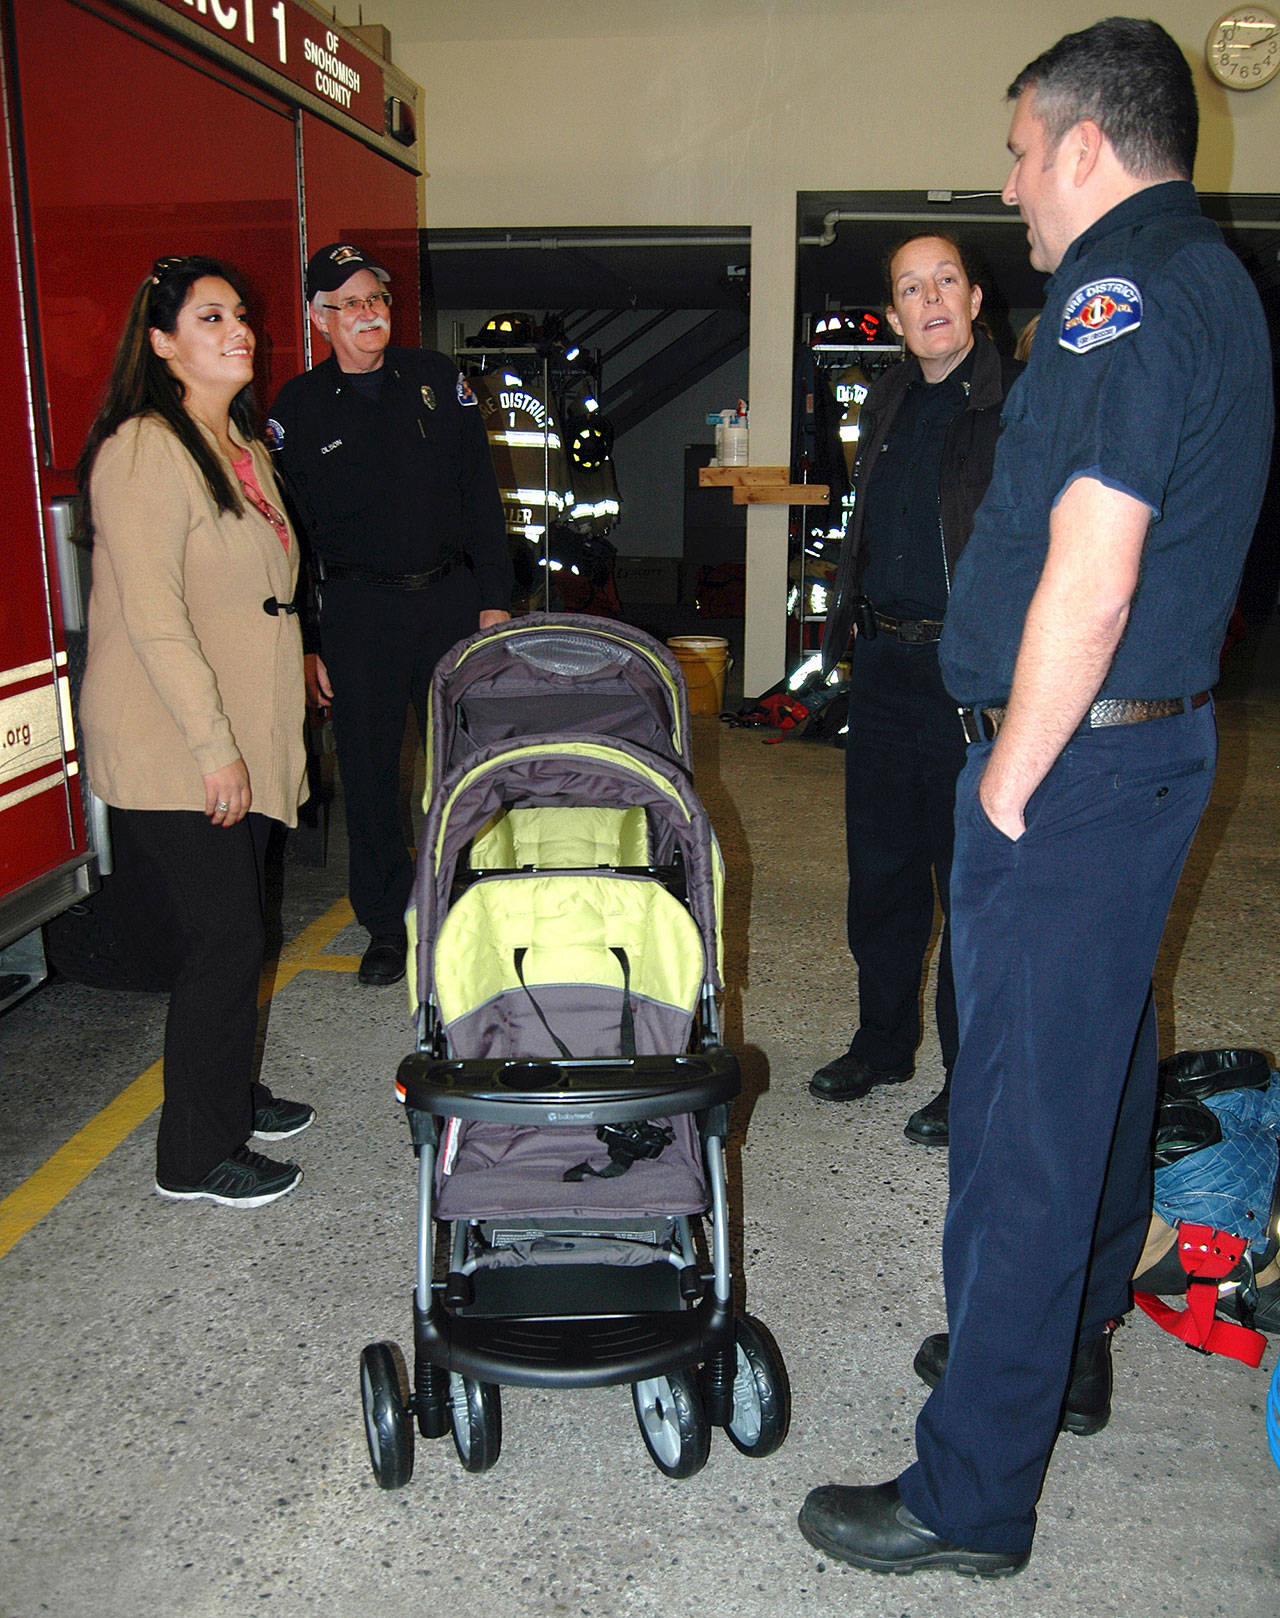 Firefighters come to the rescue and give mom new stroller | HeraldNet.com